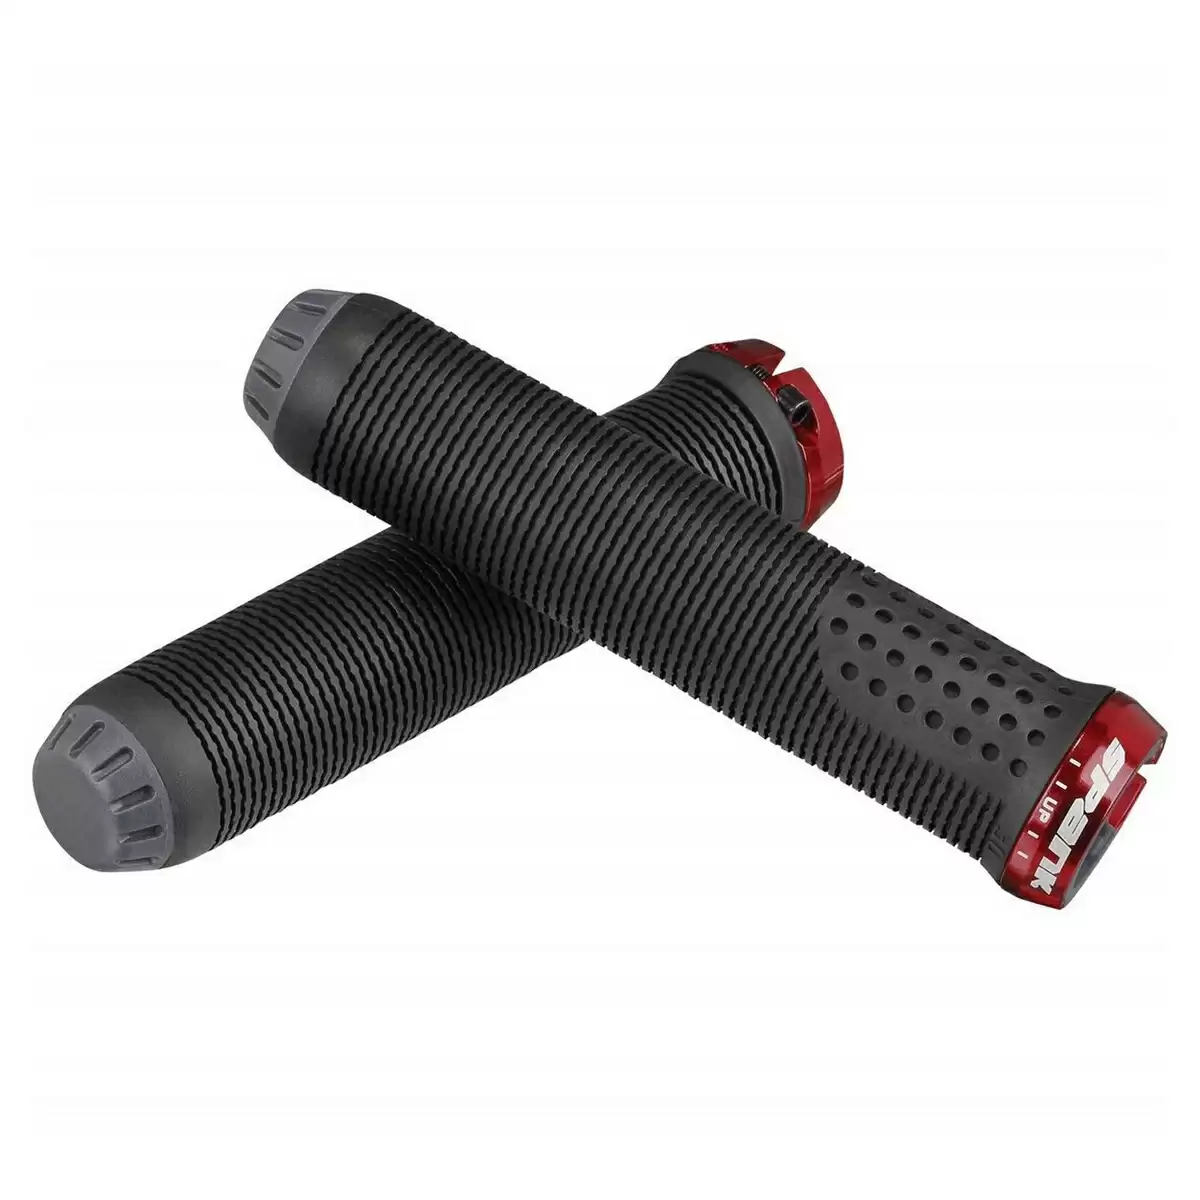 Lock-on grips Spike 30 145mm red - image